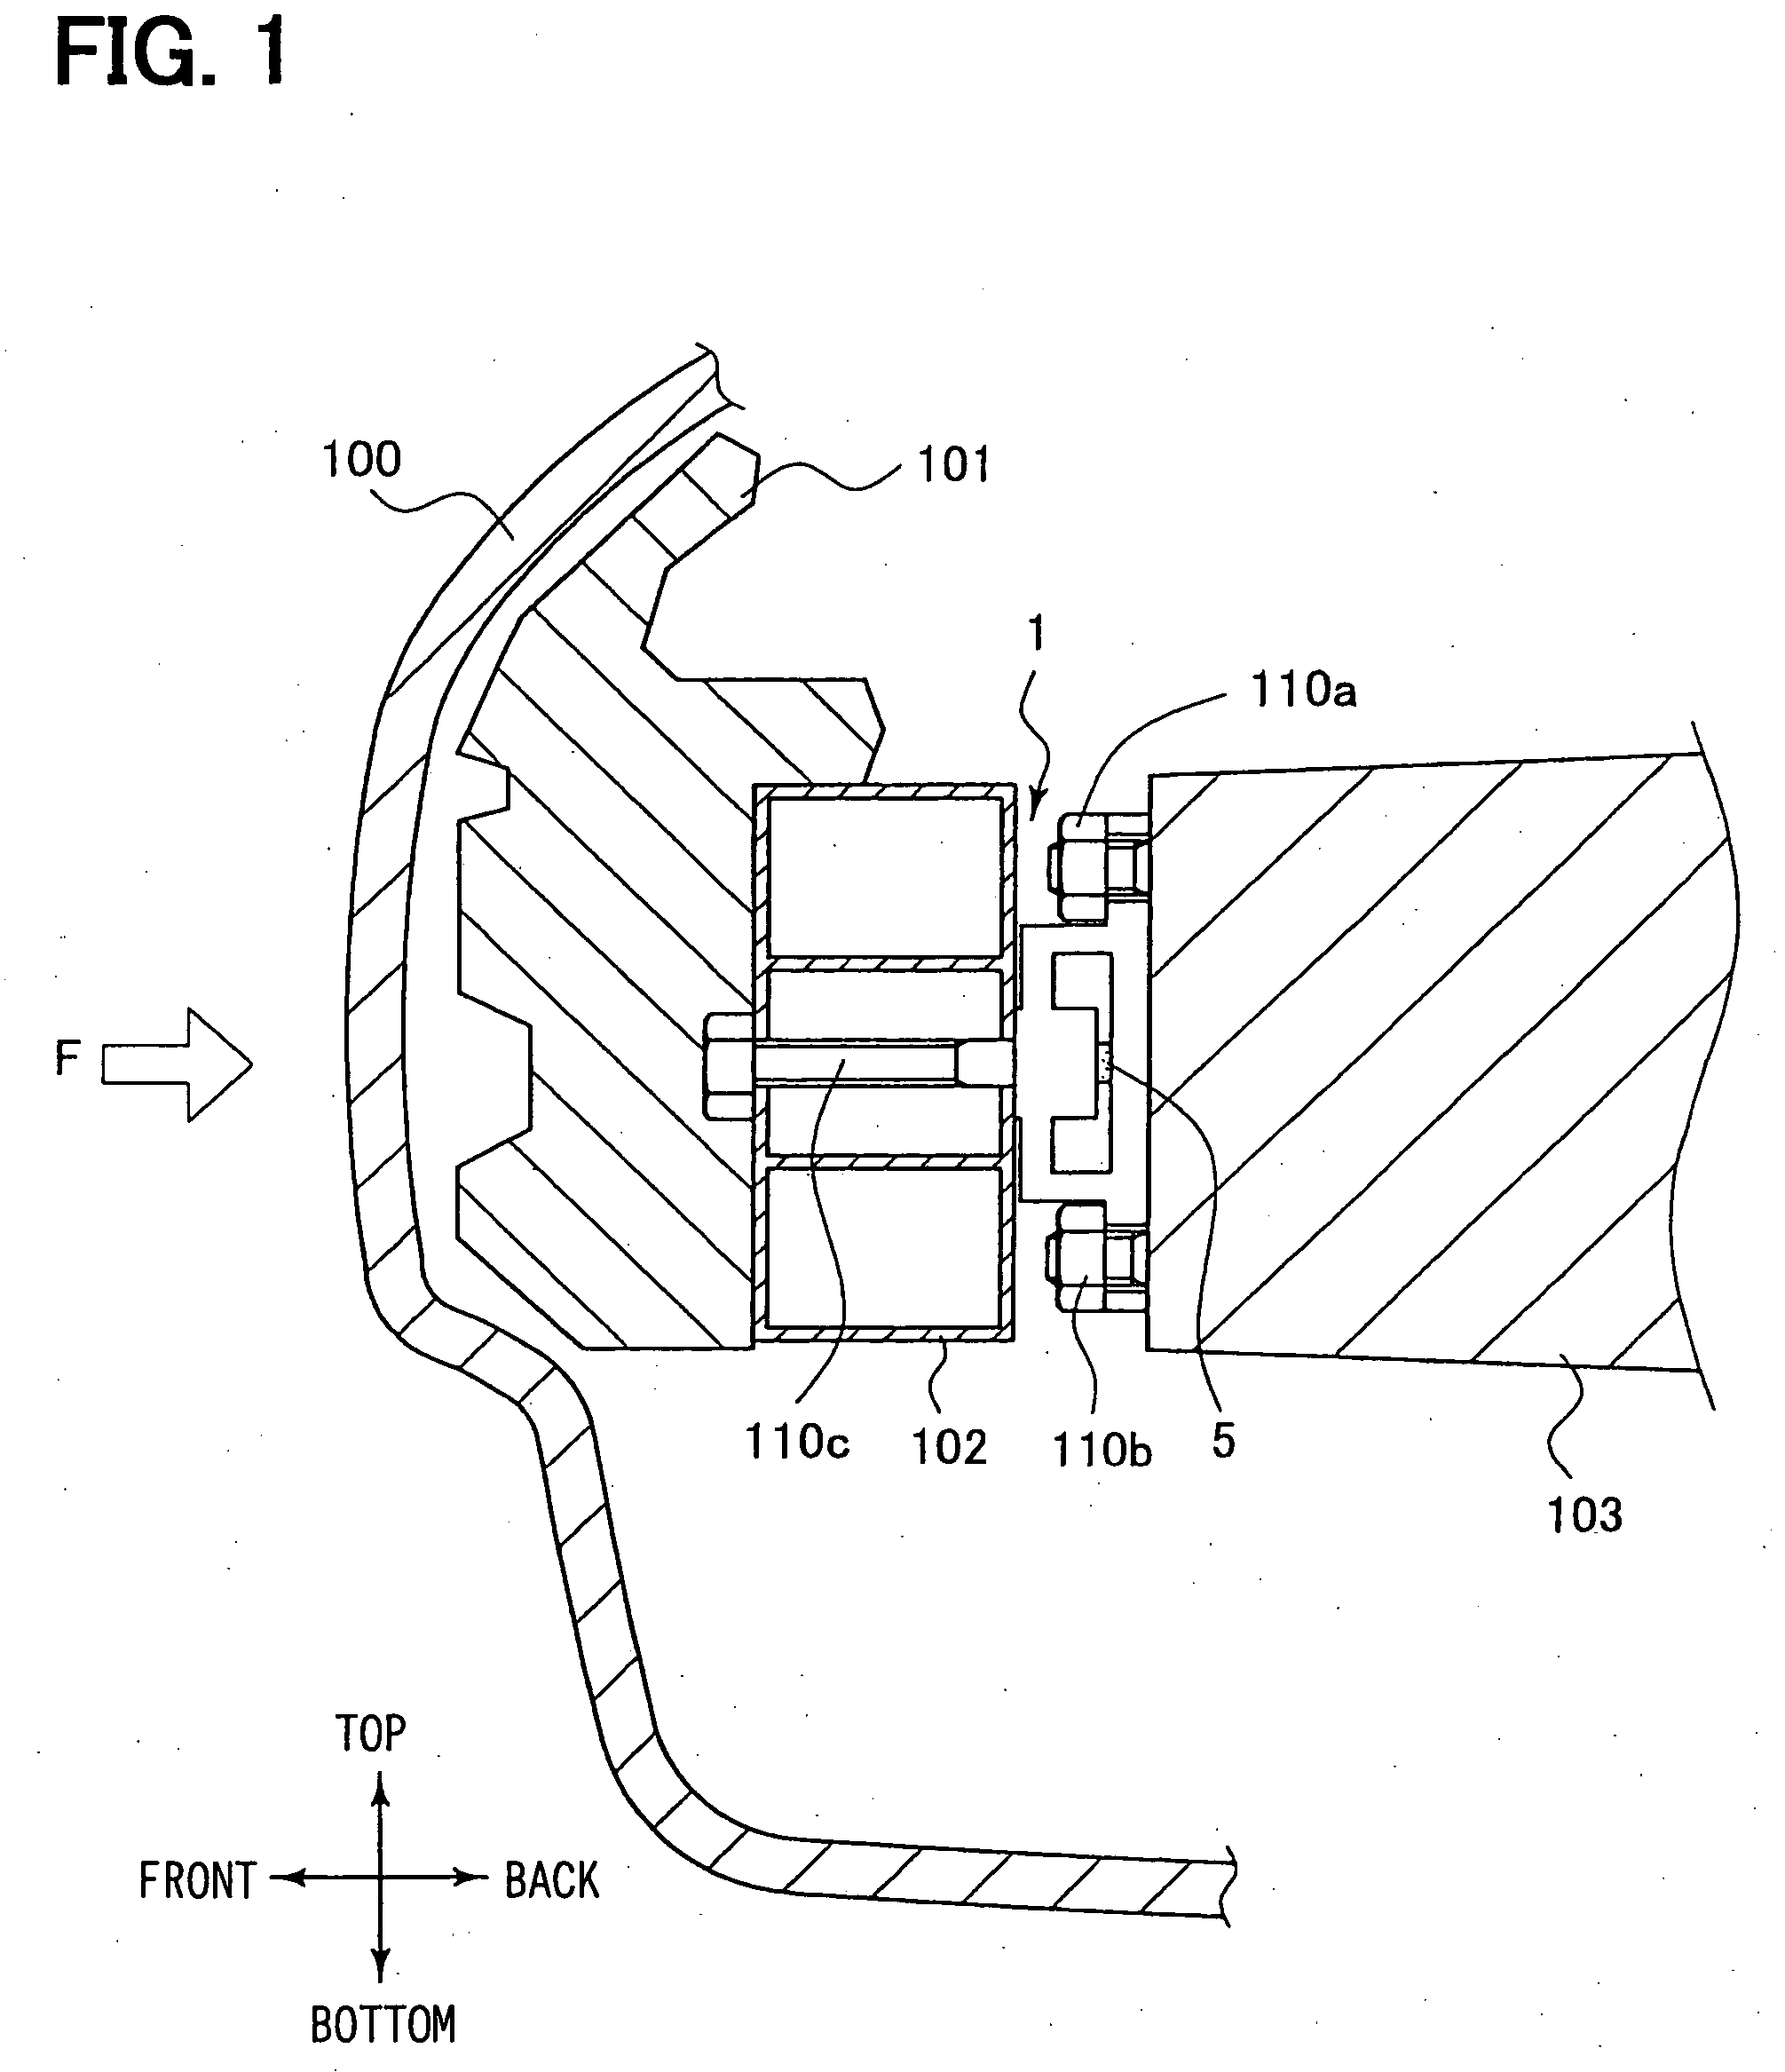 Load-detecting device